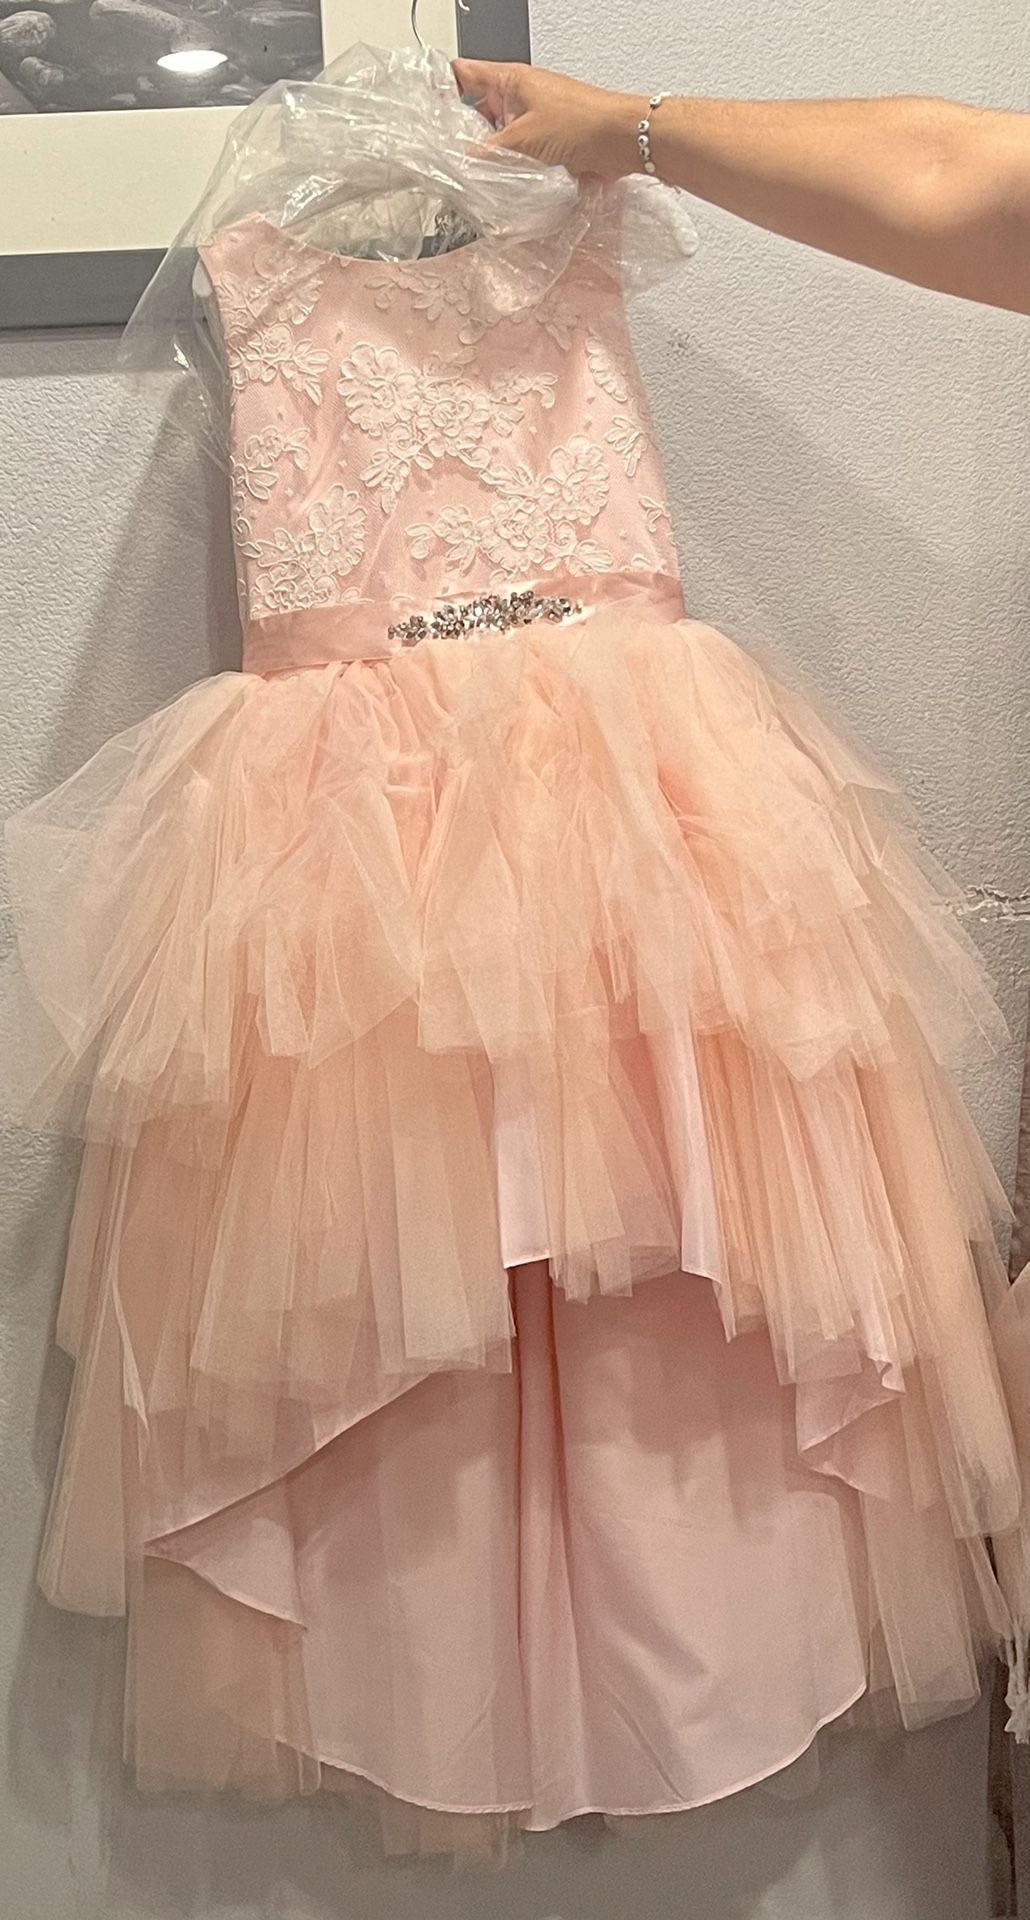 Girls Dress Style 5722 - Satin and Tulle High-Low Dress in Blush